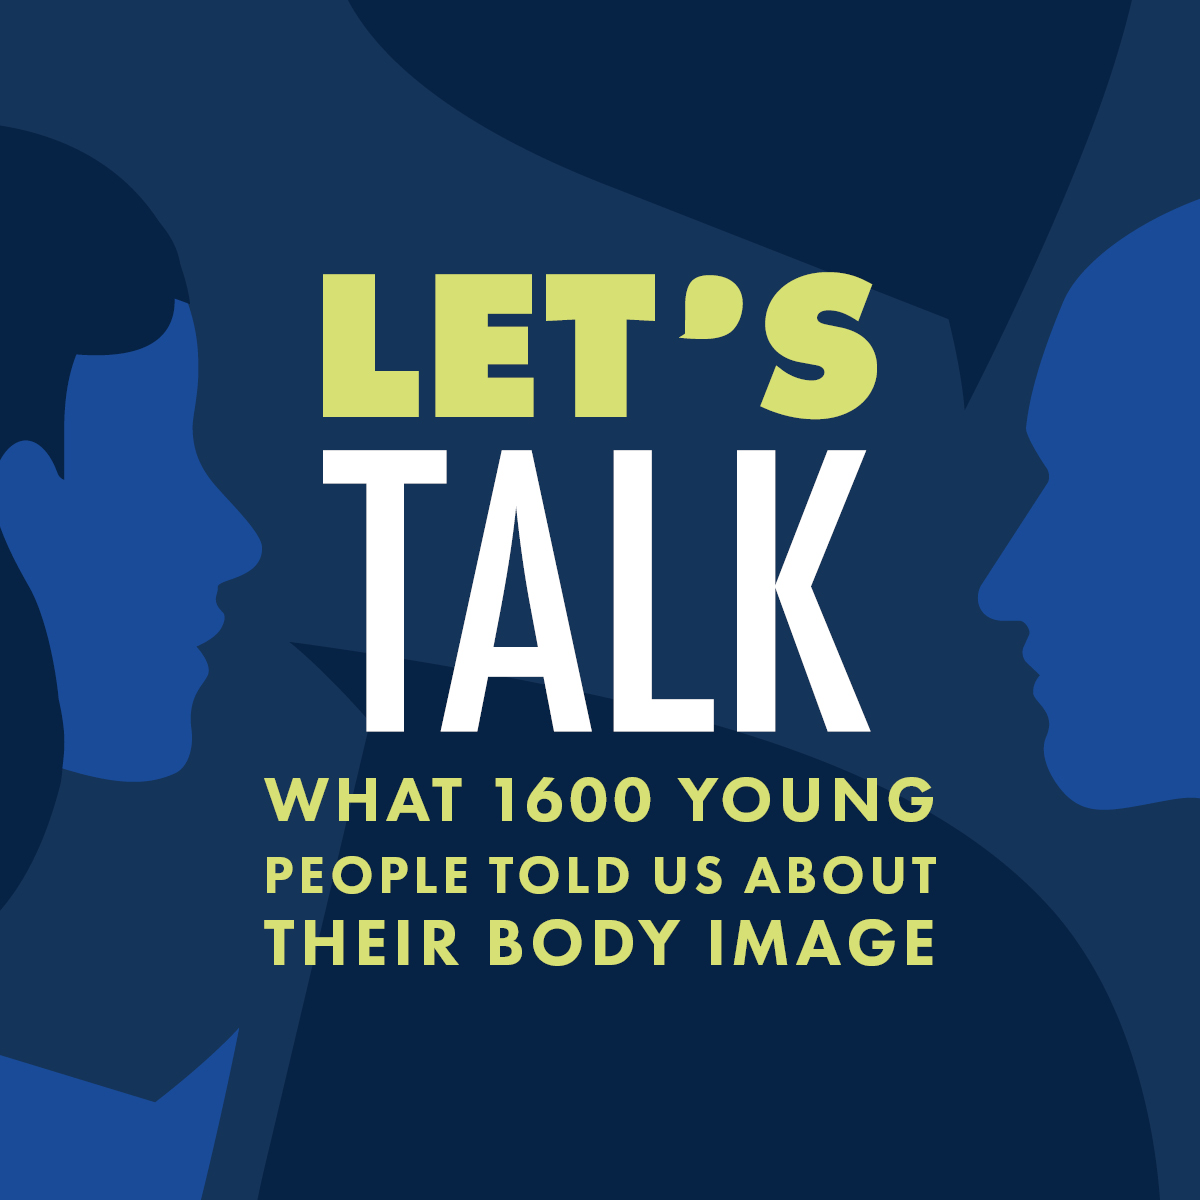 What 1600 young people told us about their body image